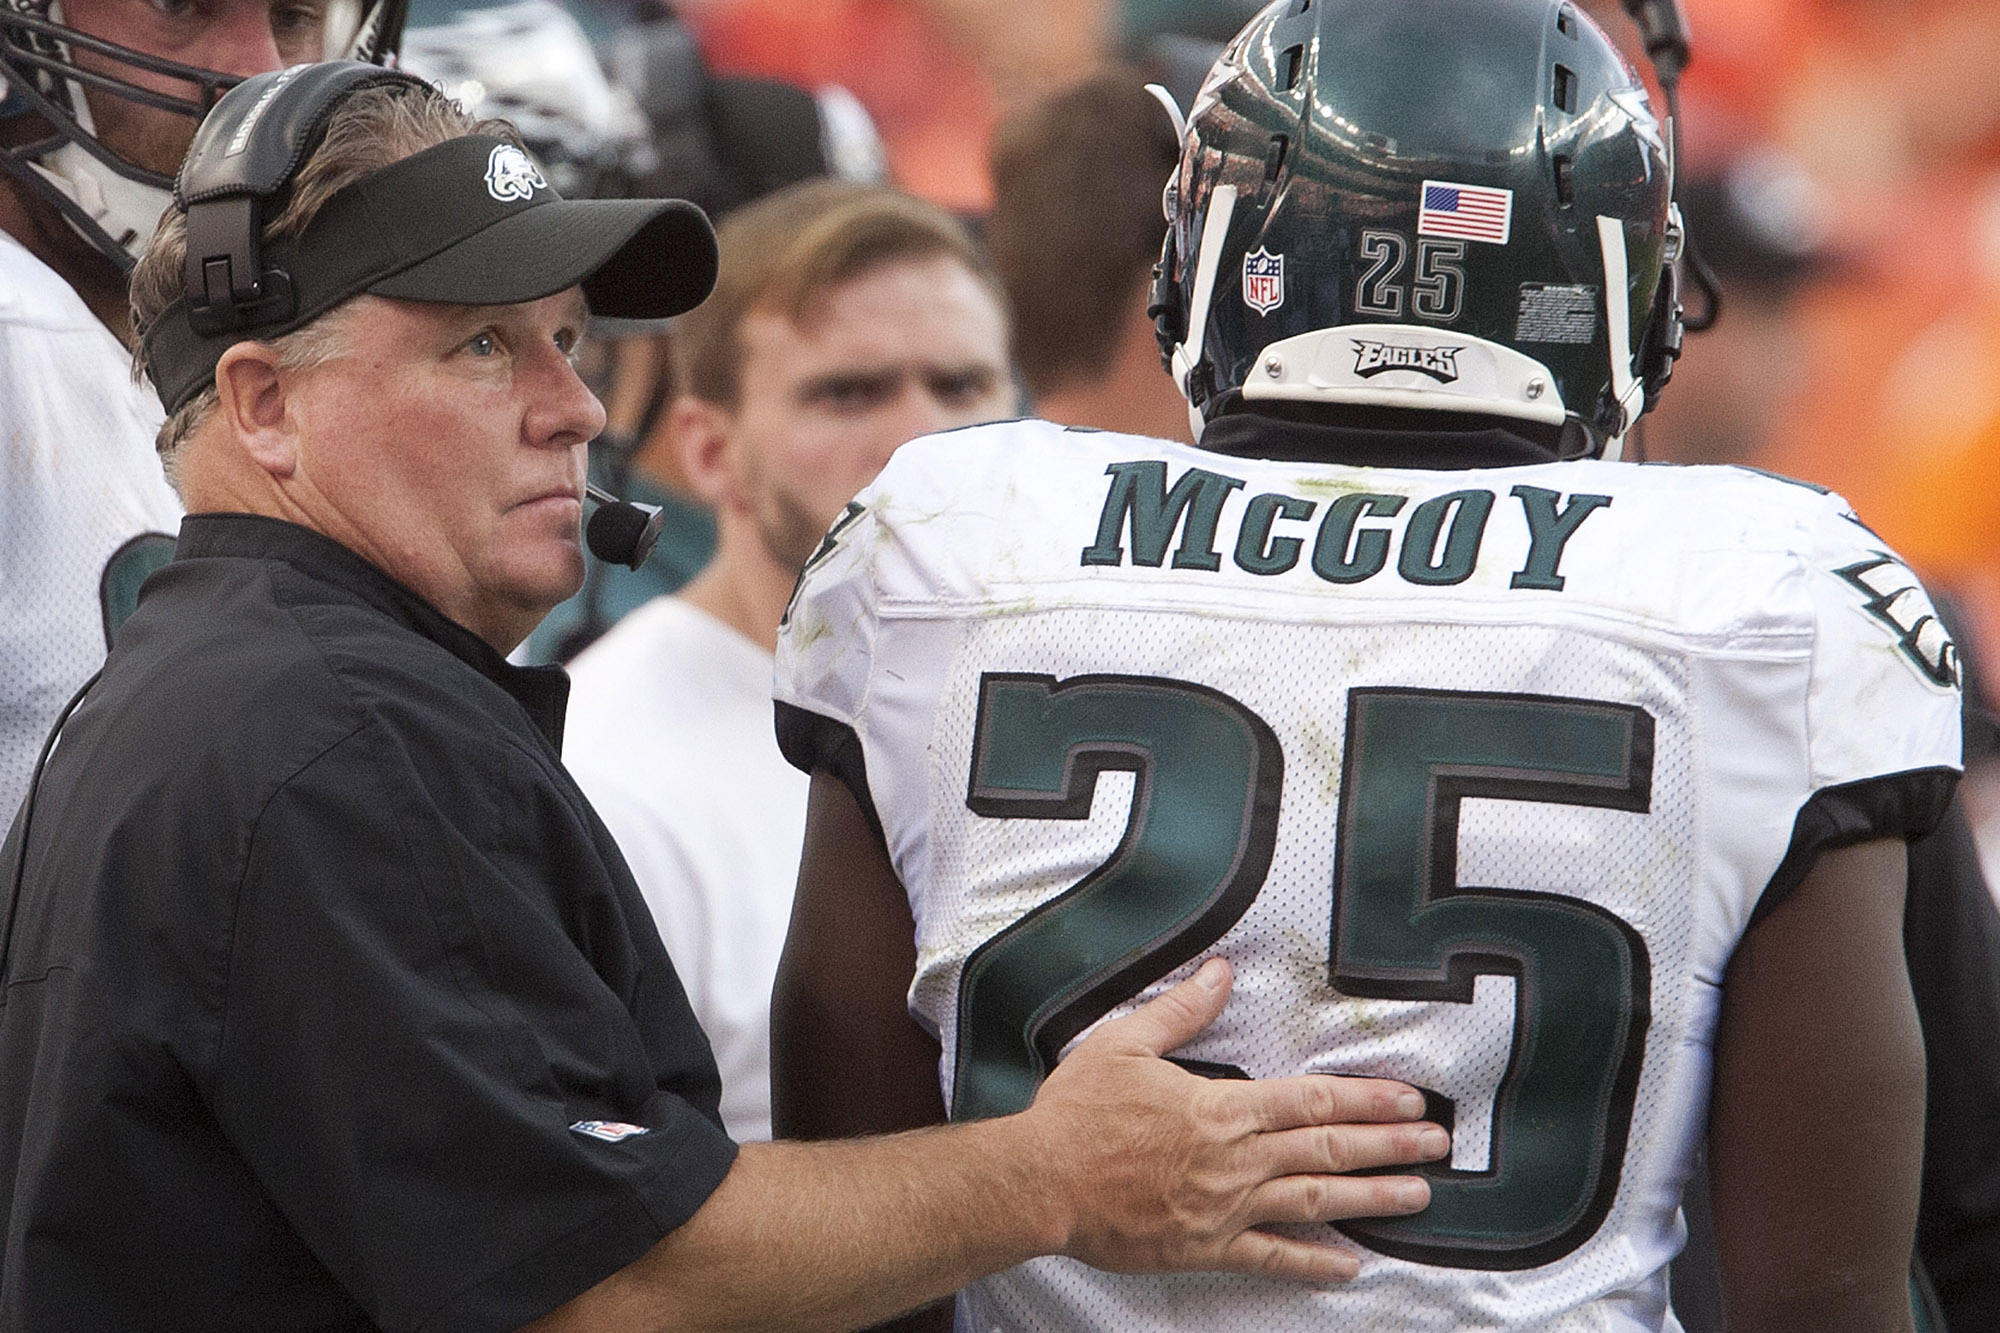 LeSean McCoy Says Chip Kelly Doesn’t Like Or Respect Star Players